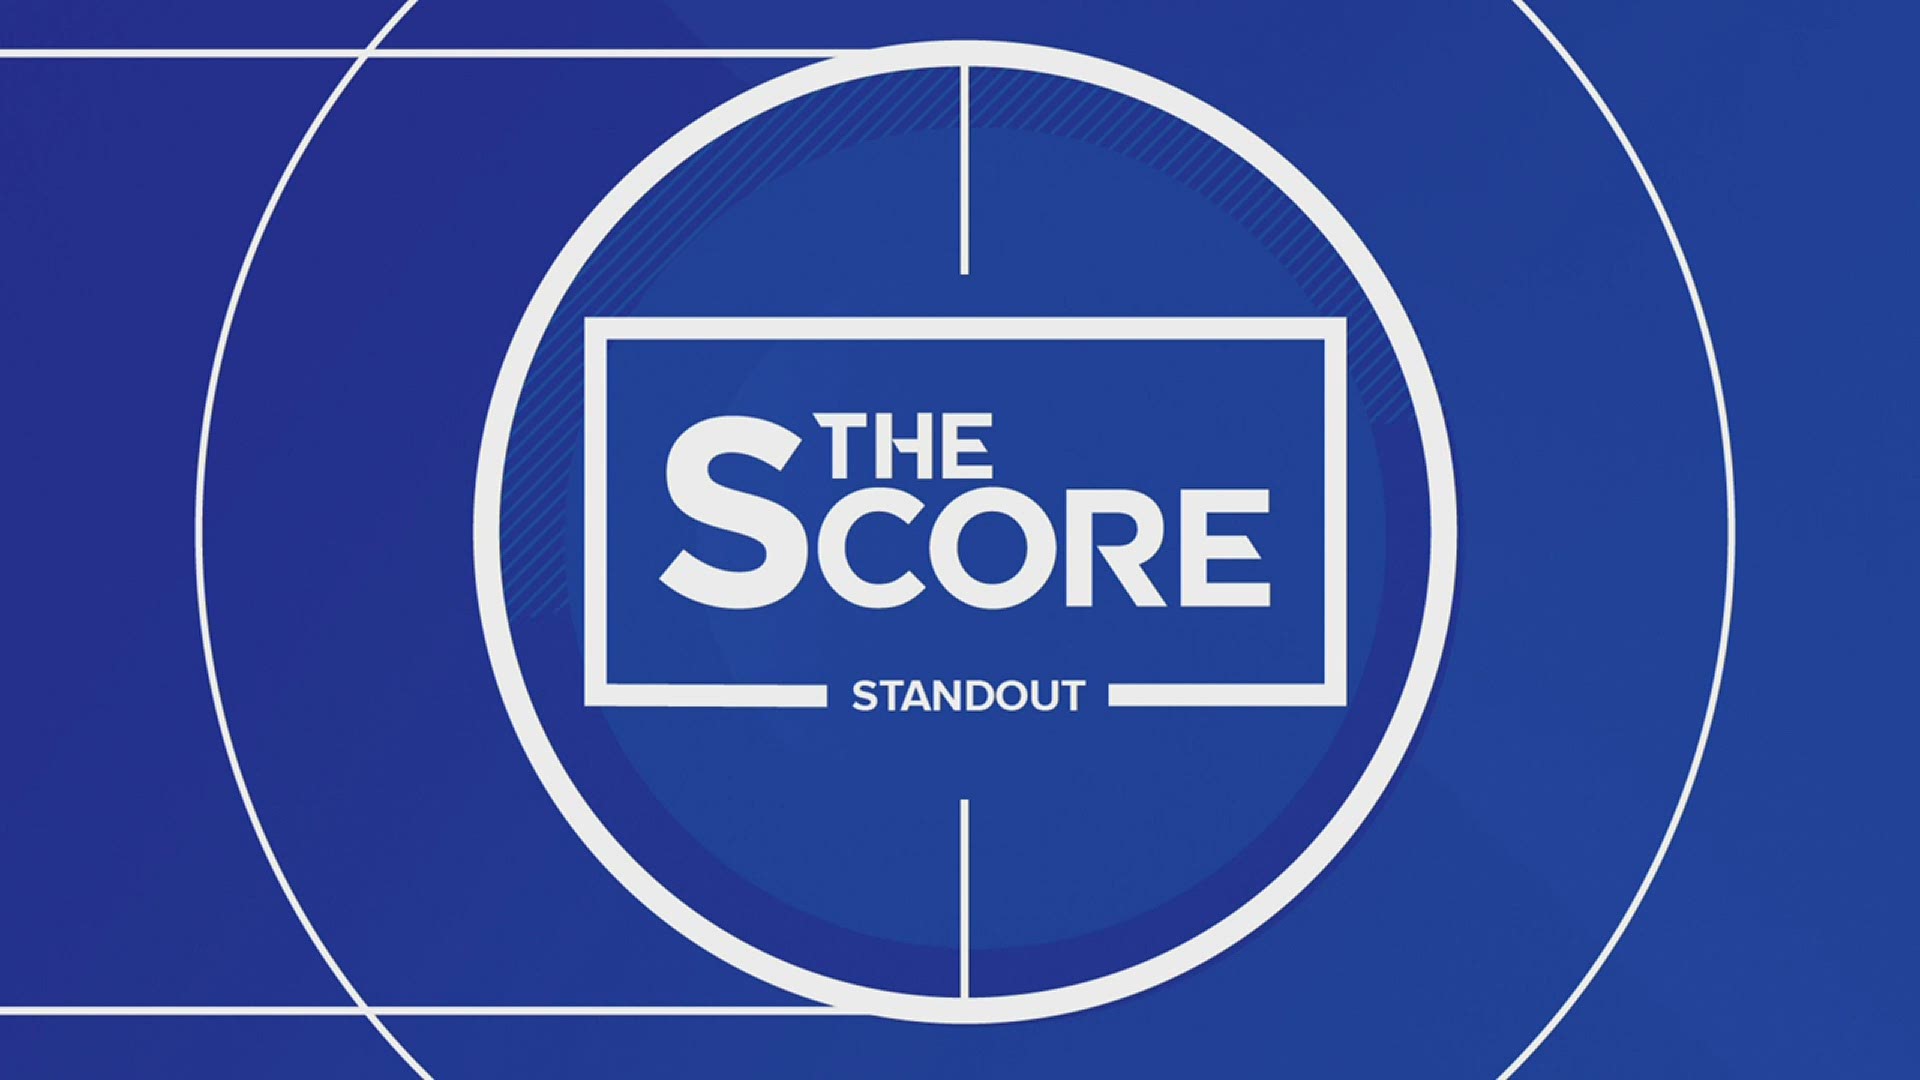 Make sure to vote for this weeks Score Standout. Sponsored by Skilled Neighbors - Plumbers, Pipefitter and HVACR Techs.